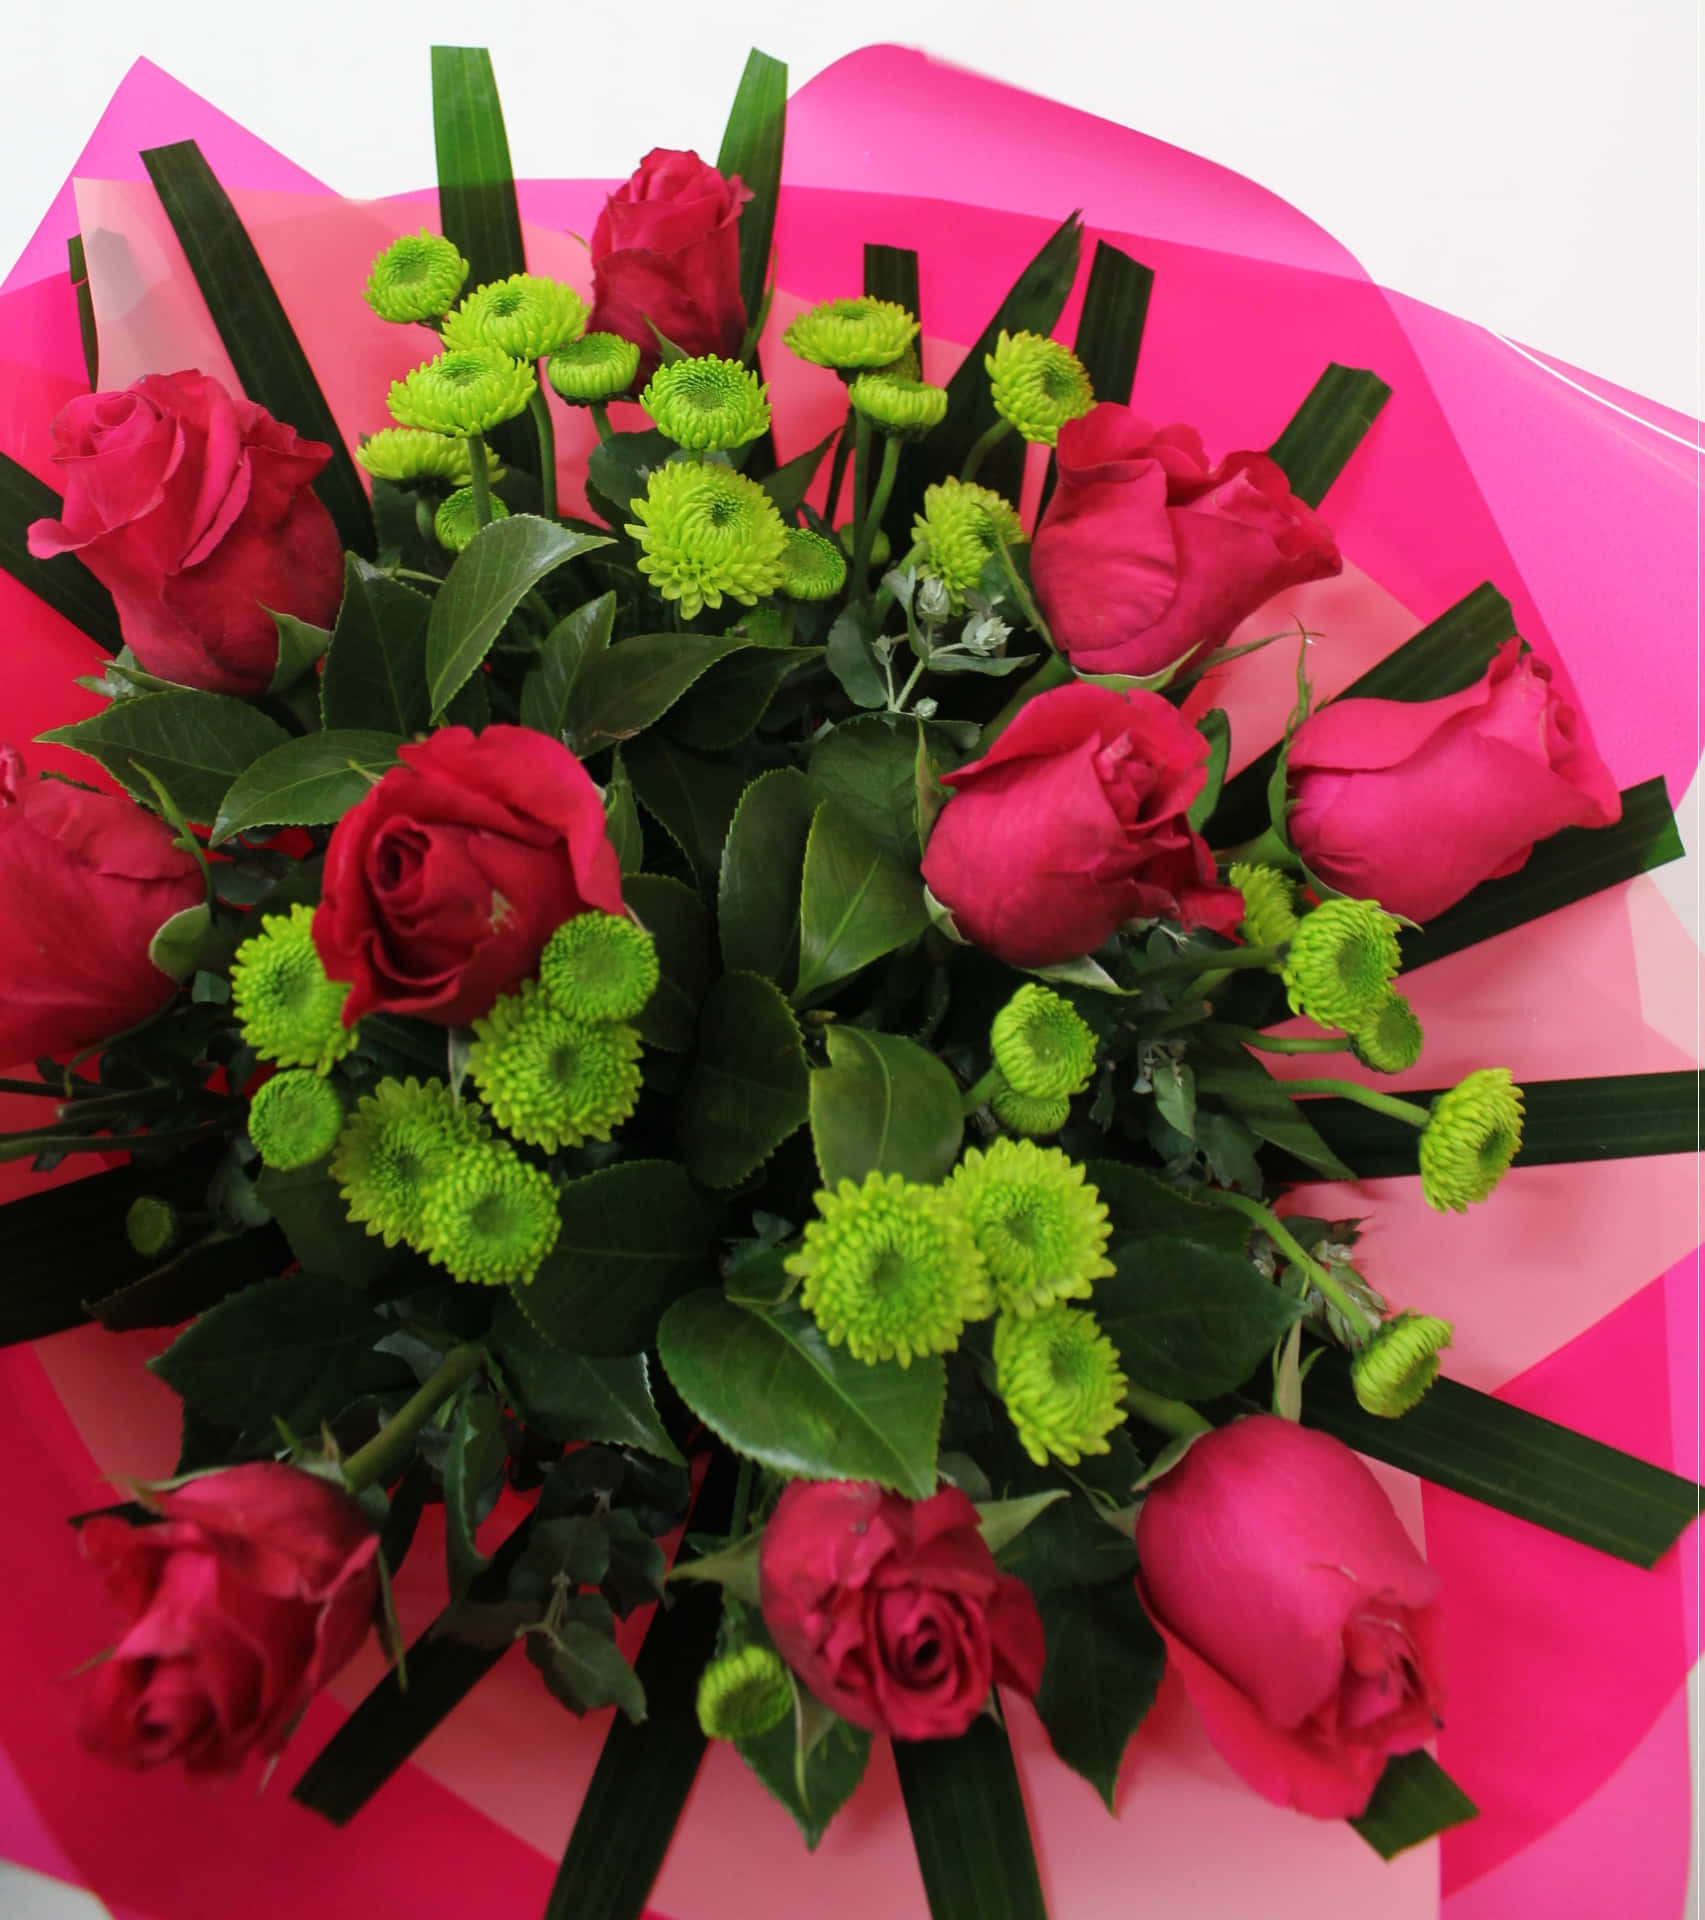 A vibrant, handcrafted flower bouquet perfect for any occasion.